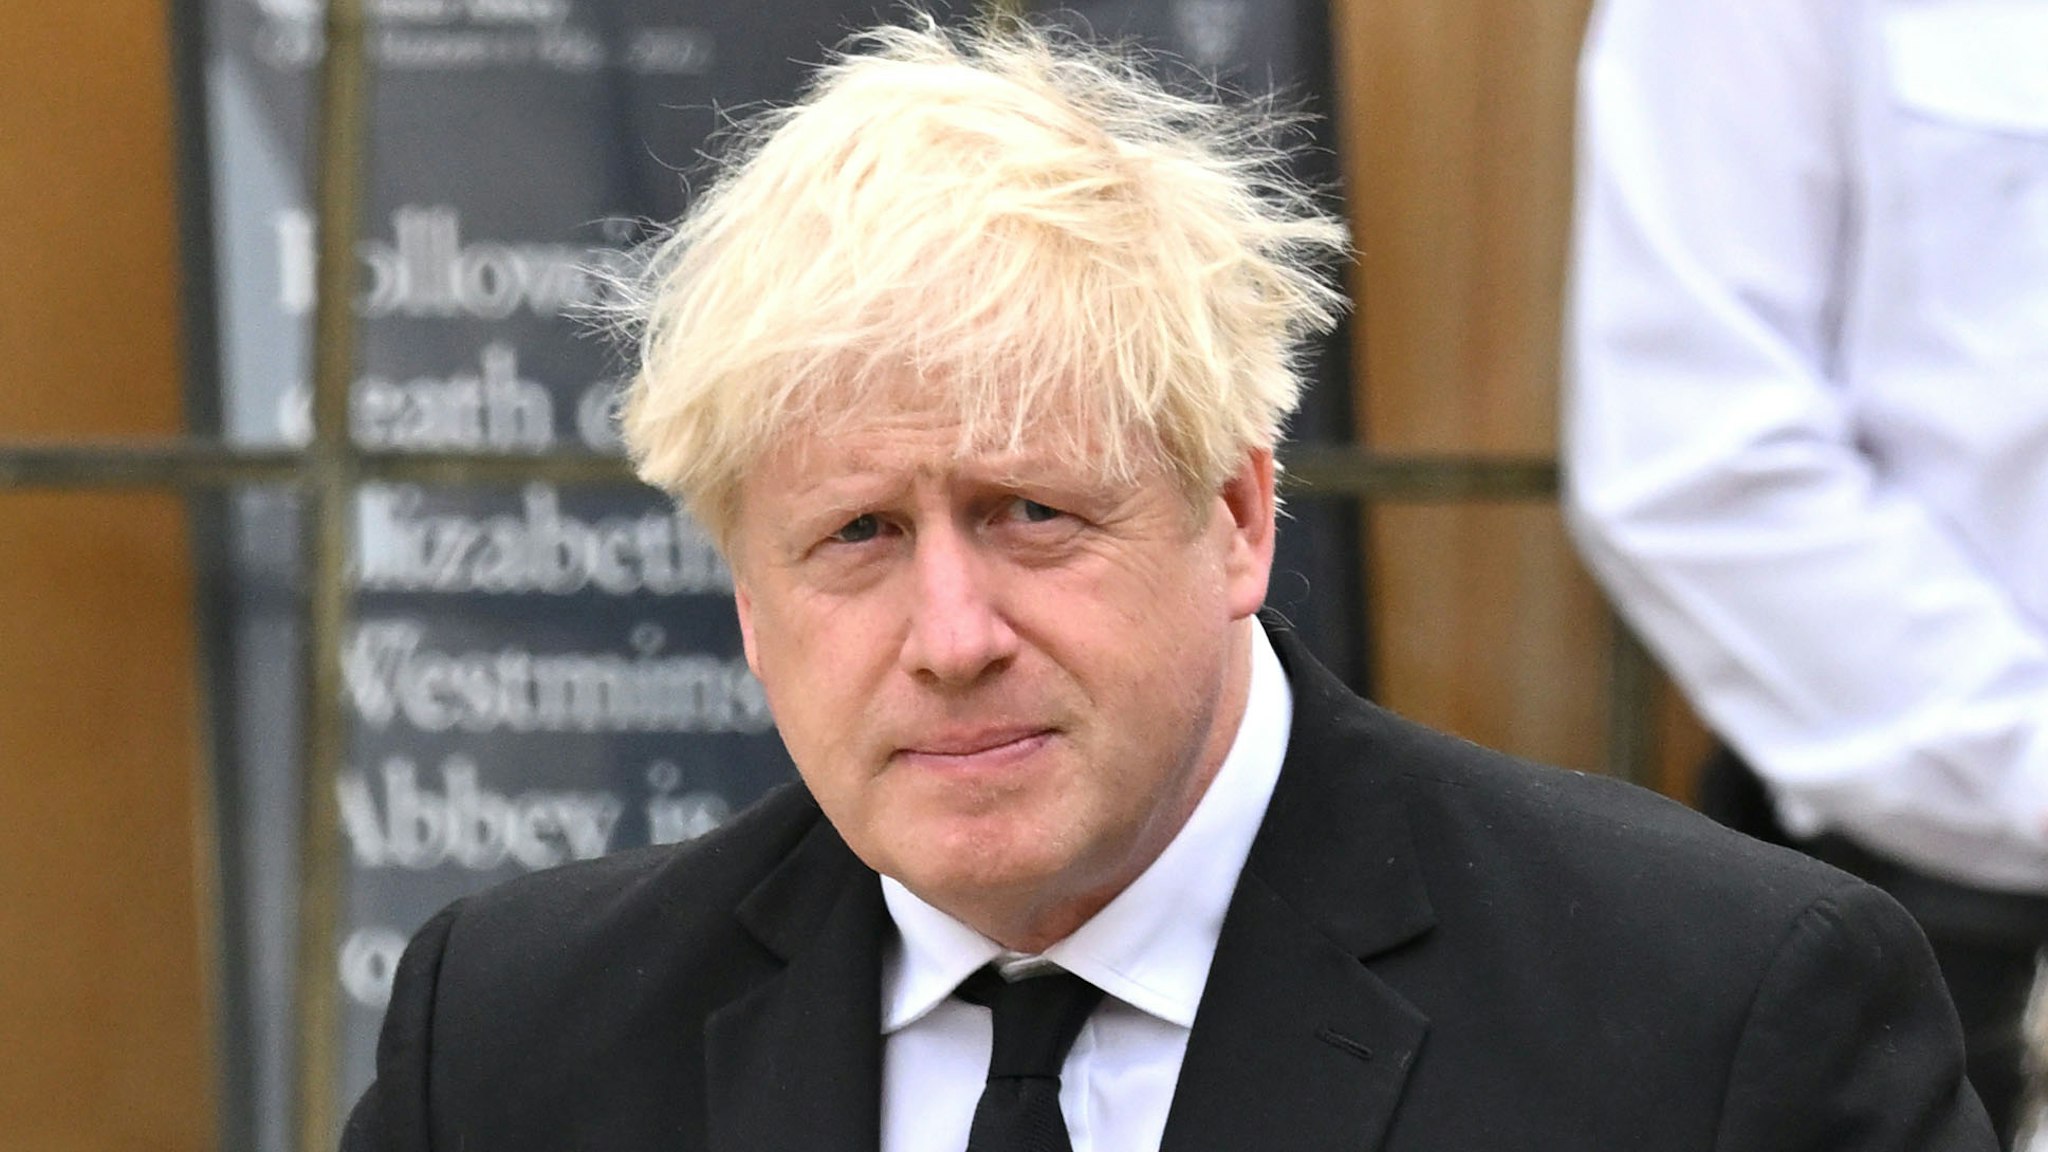 LONDON, ENGLAND - SEPTEMBER 19: Boris Johnson during the State Funeral of Queen Elizabeth II at Westminster Abbey on September 19, 2022 in London, England. Elizabeth Alexandra Mary Windsor was born in Bruton Street, Mayfair, London on 21 April 1926. She married Prince Philip in 1947 and ascended the throne of the United Kingdom and Commonwealth on 6 February 1952 after the death of her Father, King George VI. Queen Elizabeth II died at Balmoral Castle in Scotland on September 8, 2022, and is succeeded by her eldest son, King Charles III.